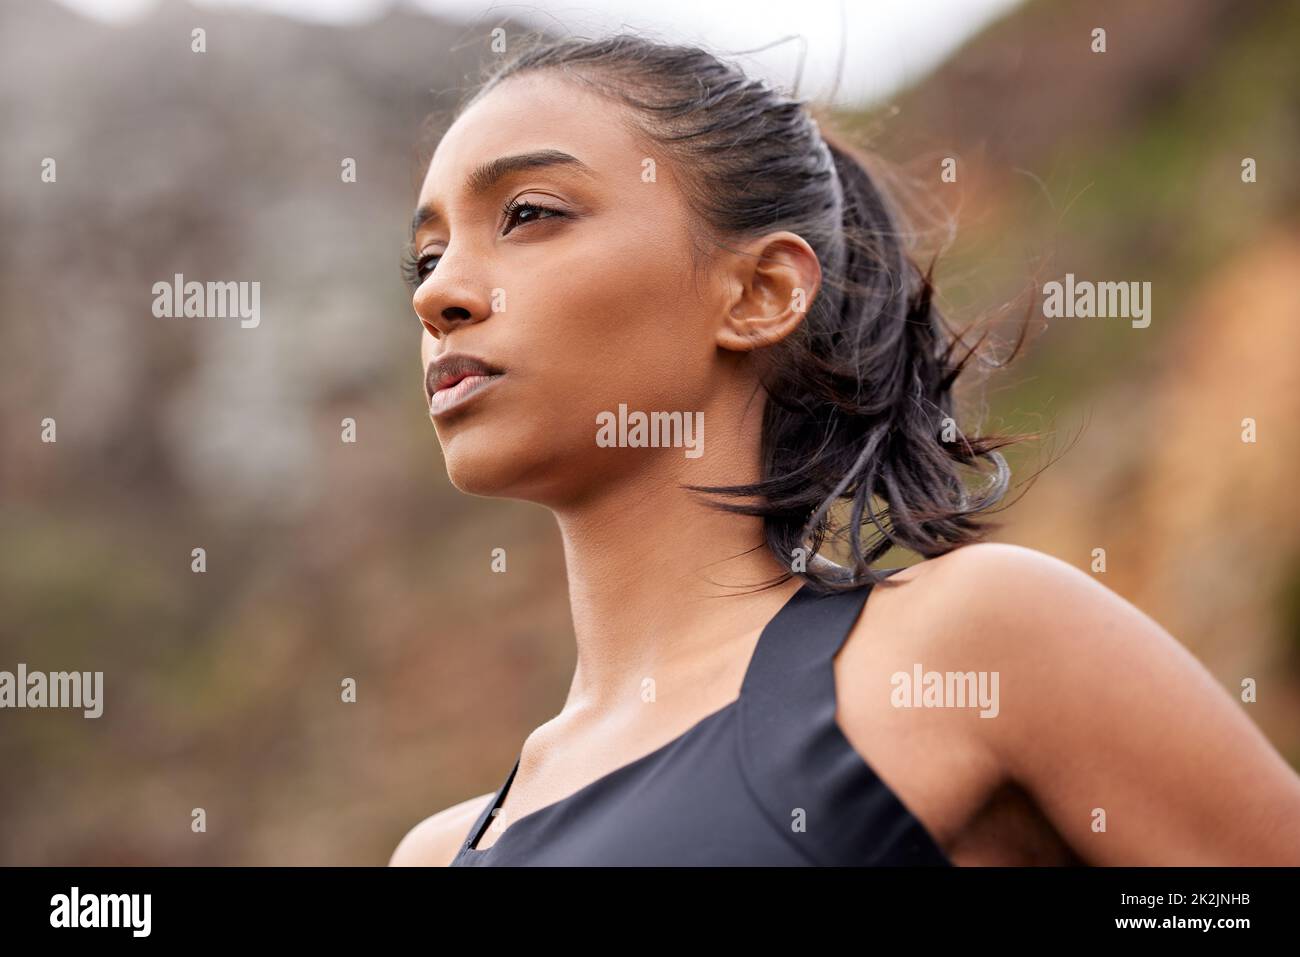 You can do it out your MIND into it. Shot of a fit young woman catching her breathe while completing her jog outdoors. Stock Photo